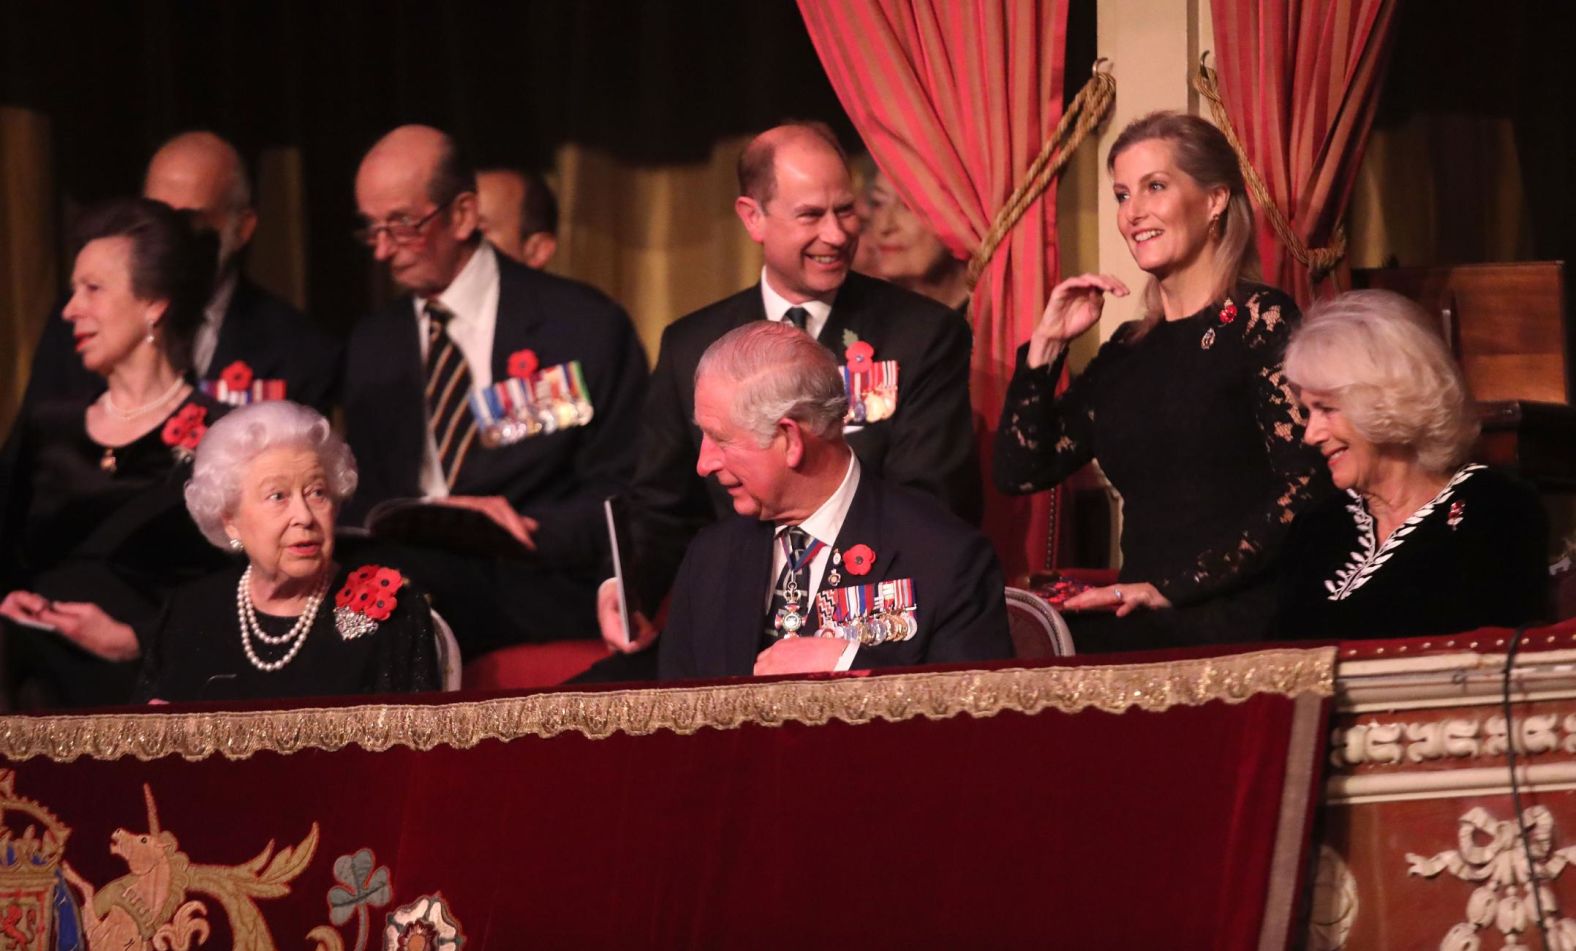 Queen Elizabeth II, Prince Edward, Earl of Wessex; Sophie, Countess of Wessex; Prince Charles, Prince of Wales; and Camilla, Duchess of Cornwall attend the Royal British Legion Festival of Remembrance at the Royal Albert Hall on Saturday, November 10, in London.